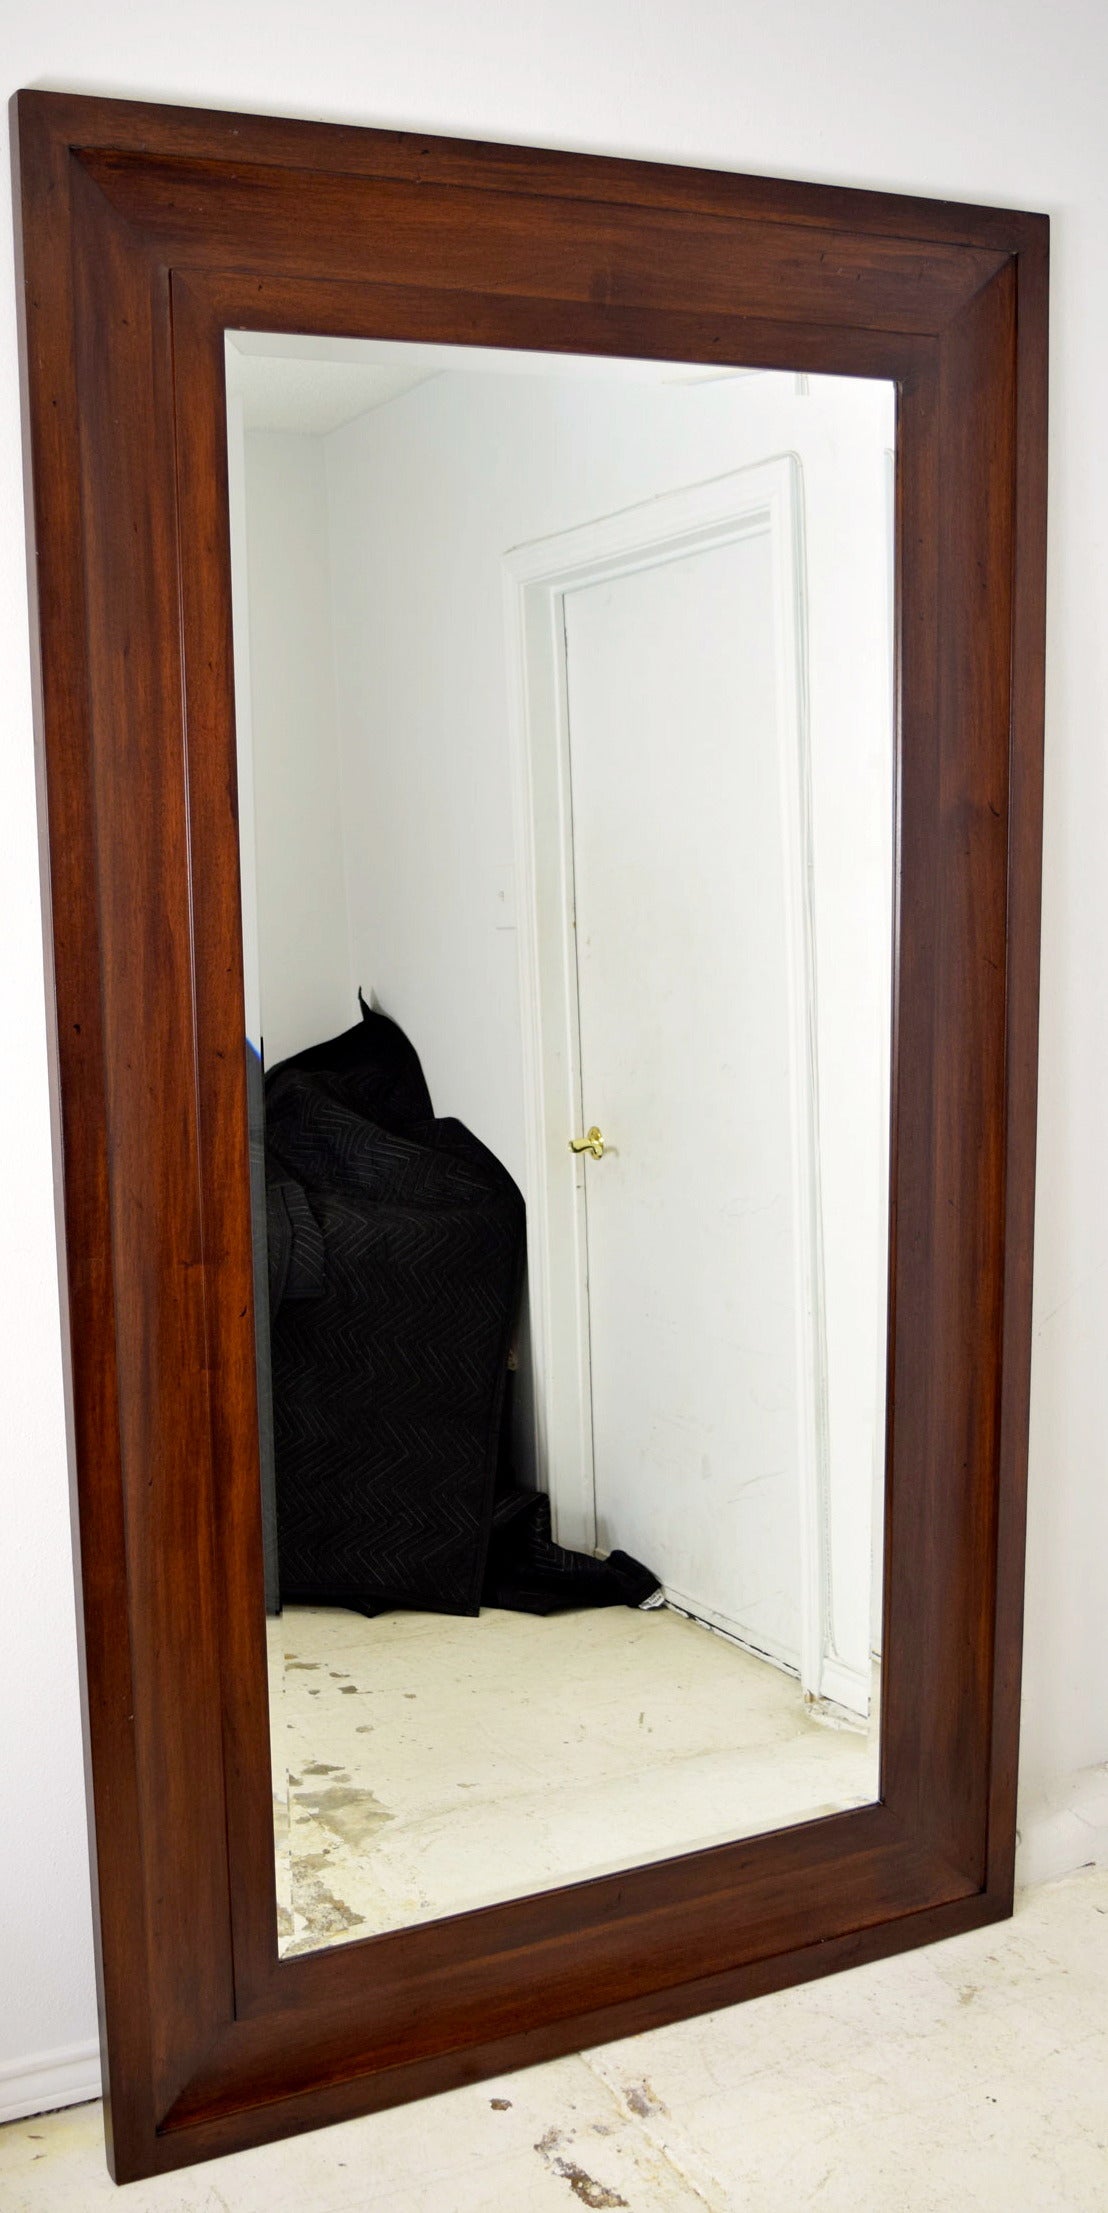 Very large mahogany framed wall mirror. Great for an entry, closet, bedroom or hallway. This mirror can easily be stained in any color or lacquered if desired.